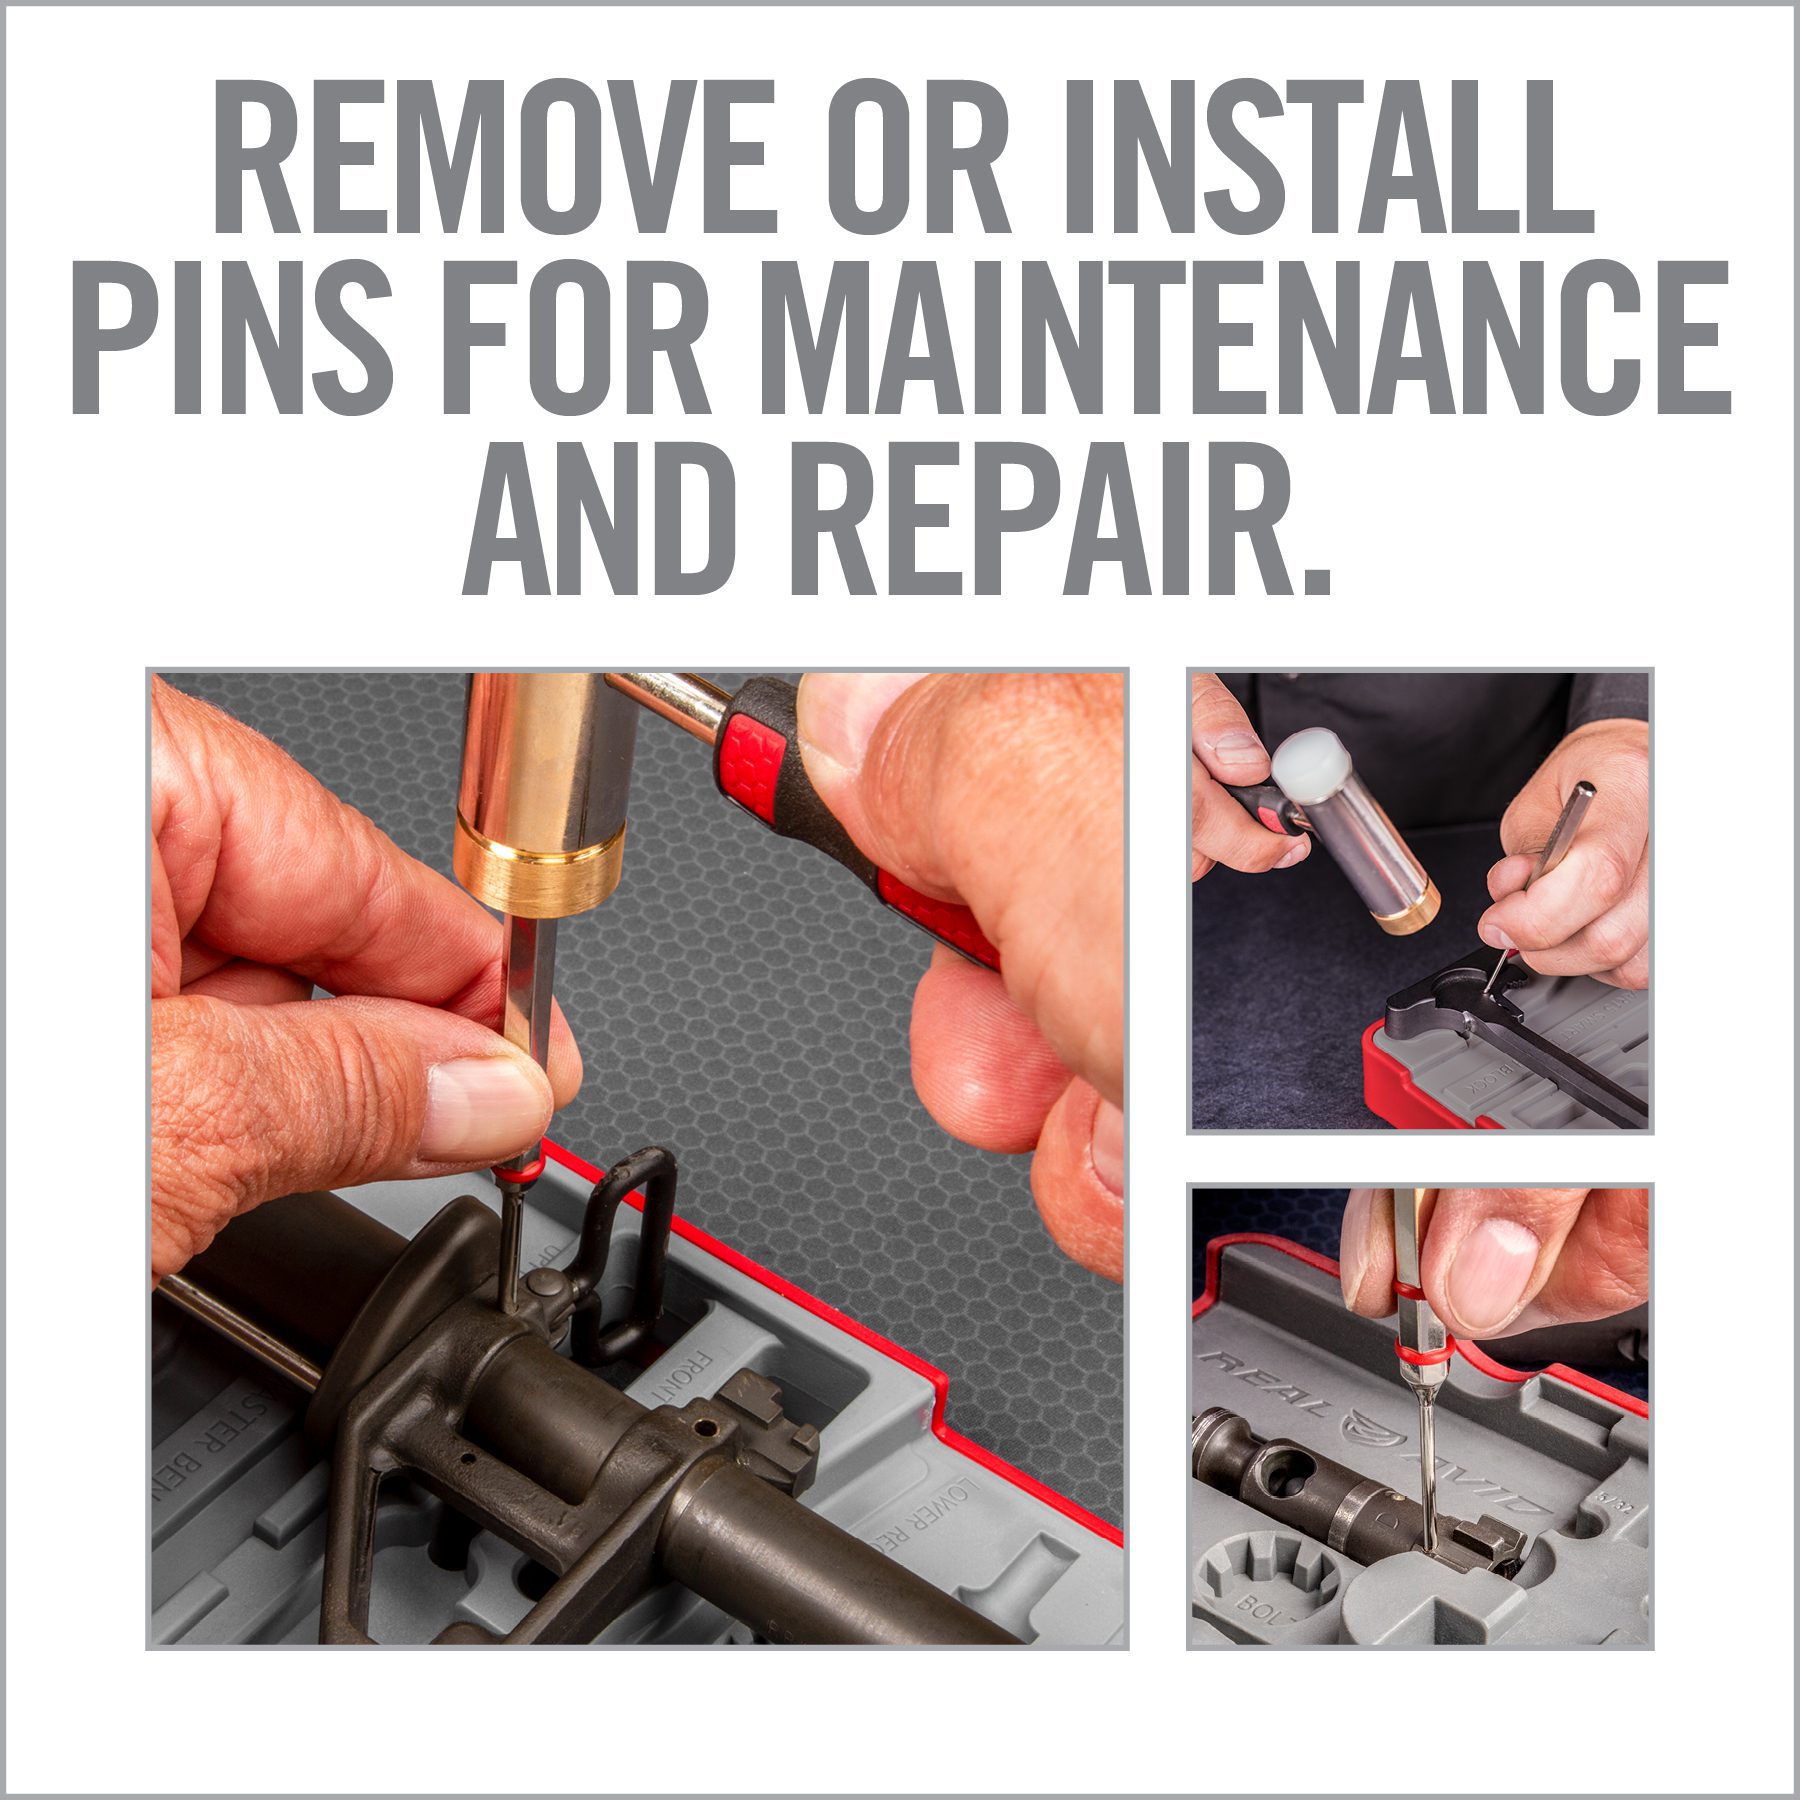 an advertisement for a repair company showing how to remove or install pins for maintenance and repair